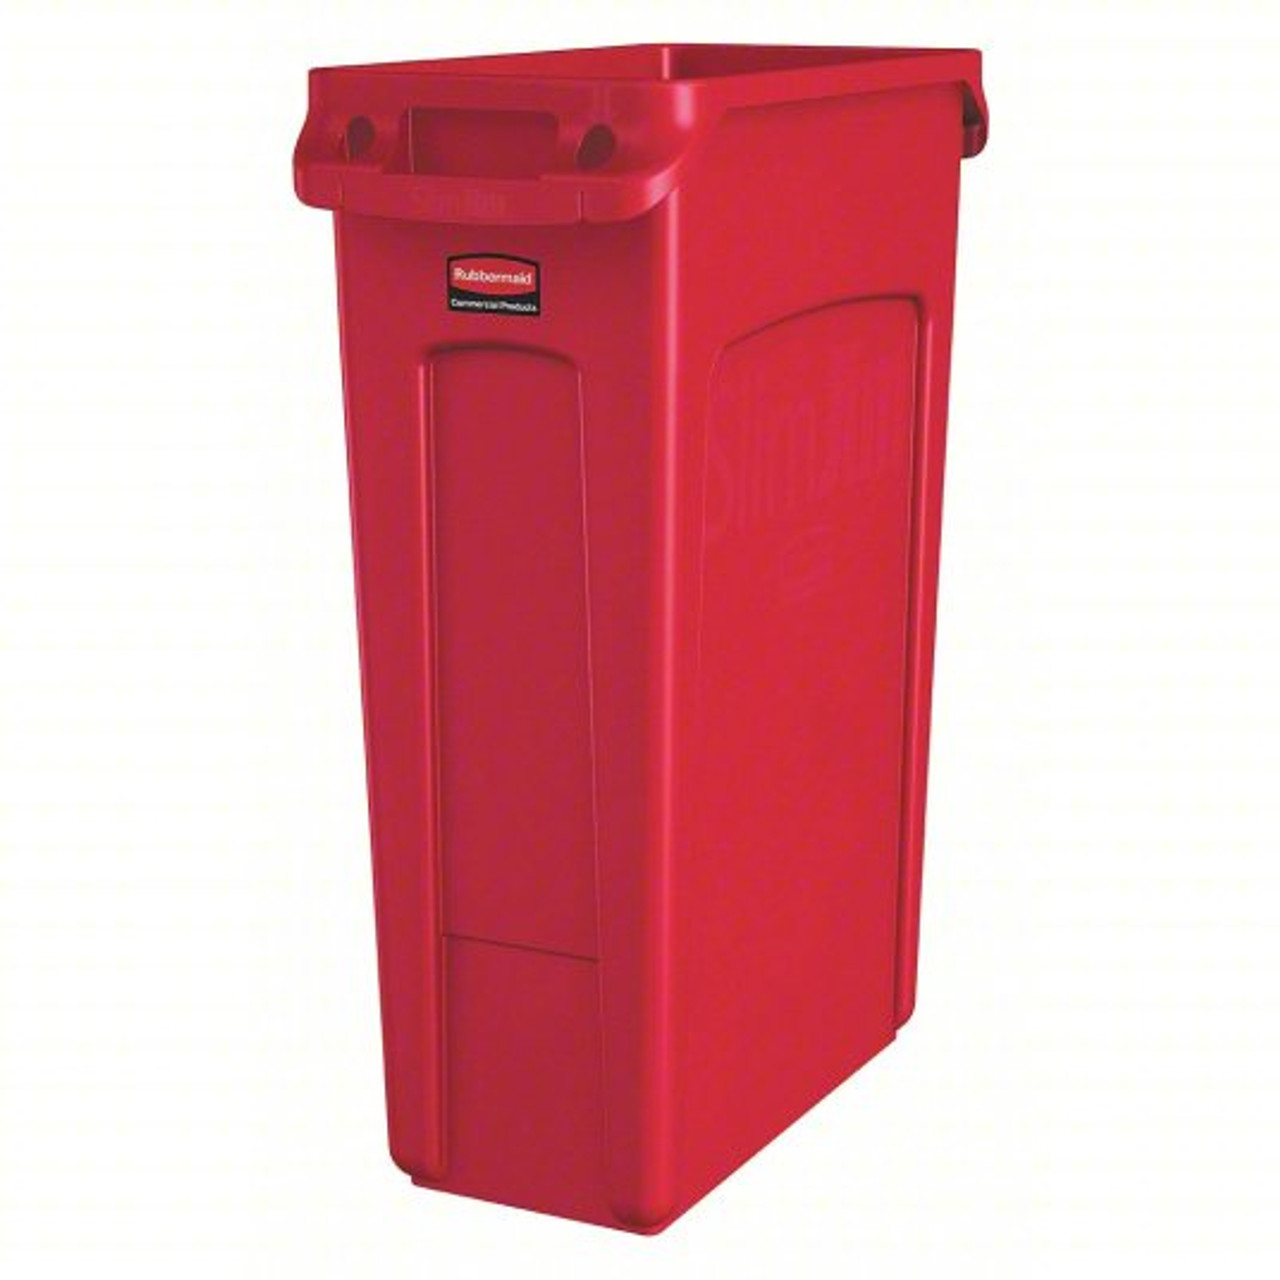 Rubbermaid Slim Jim Recycling Can, 23 Gallon, Red (4-Pack)